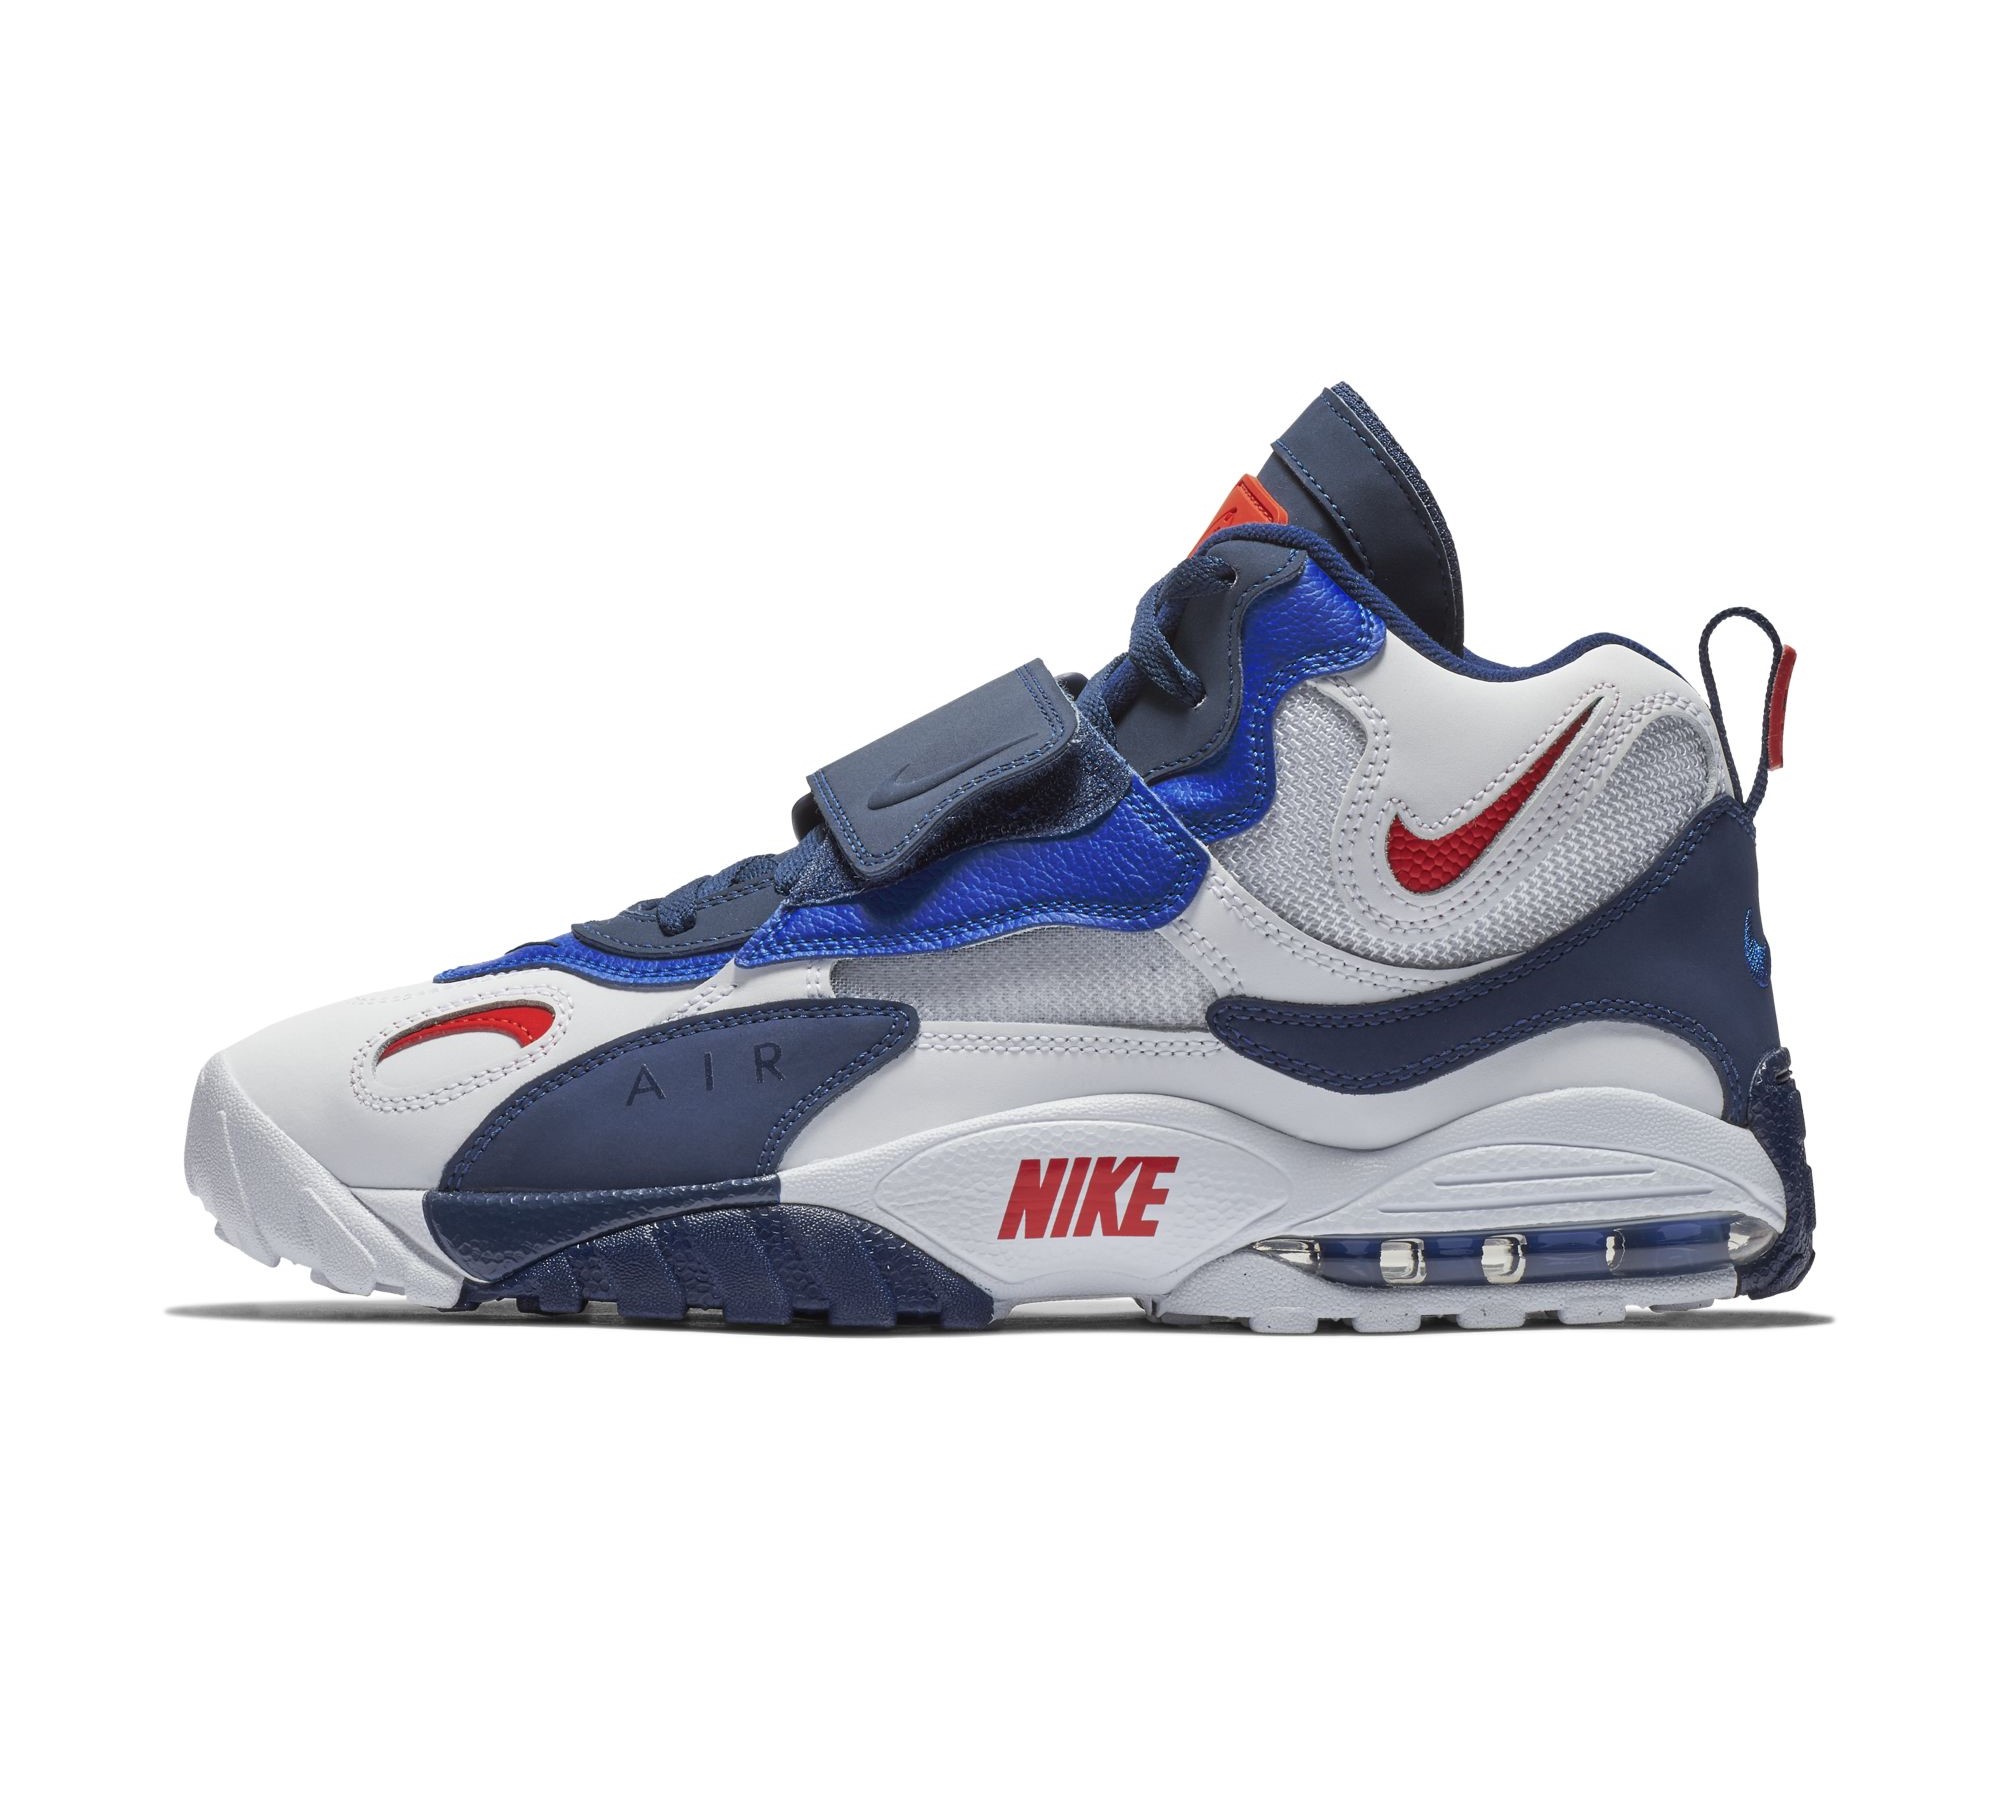 The Nike Air Max Speed Turf Has Arrived 